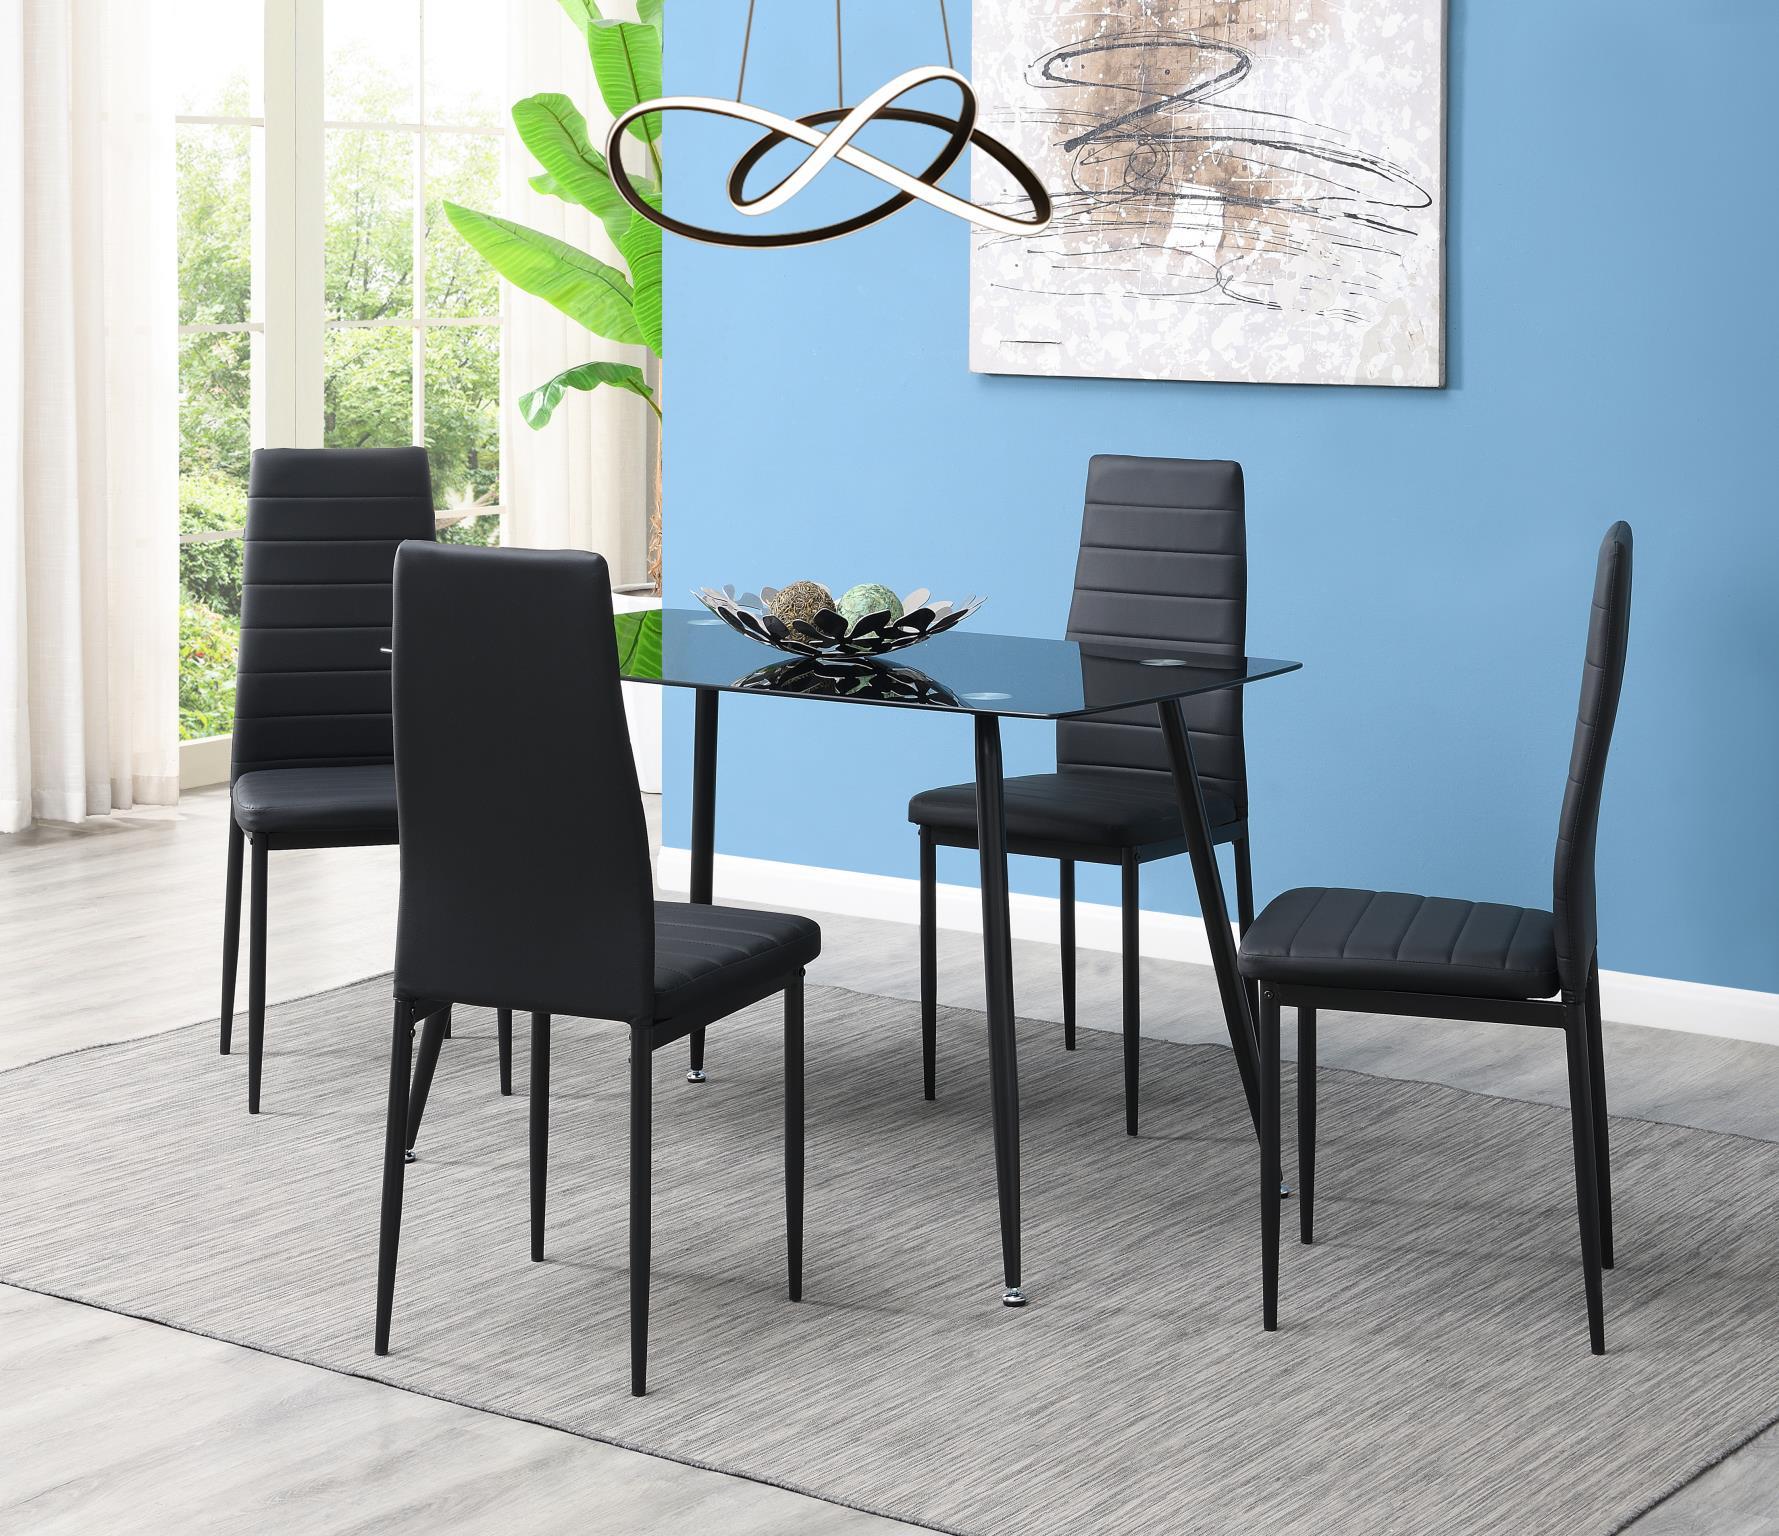 BLACK DINING TABLE & 4 CHAIRS 